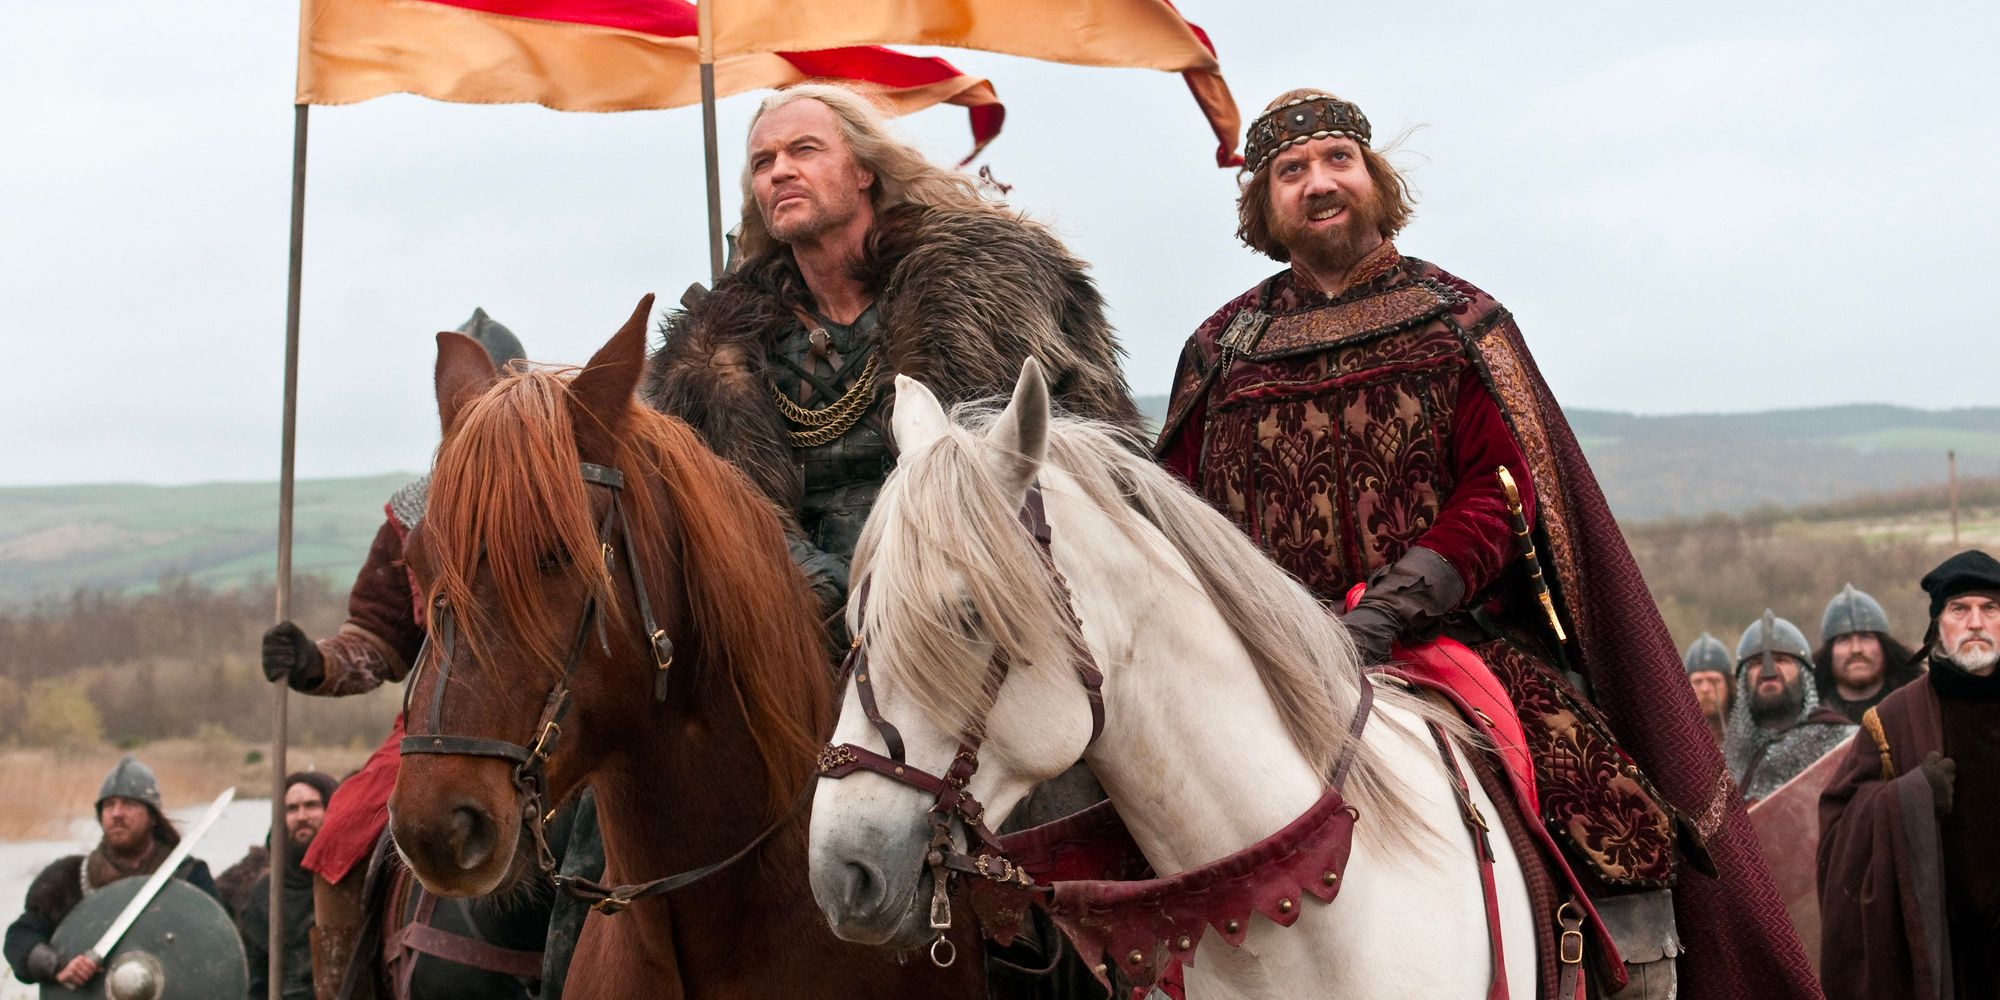 King John (Paul Giamatti) and his warrior accomplice ride their horses while being followed by a swarm of soldiers.